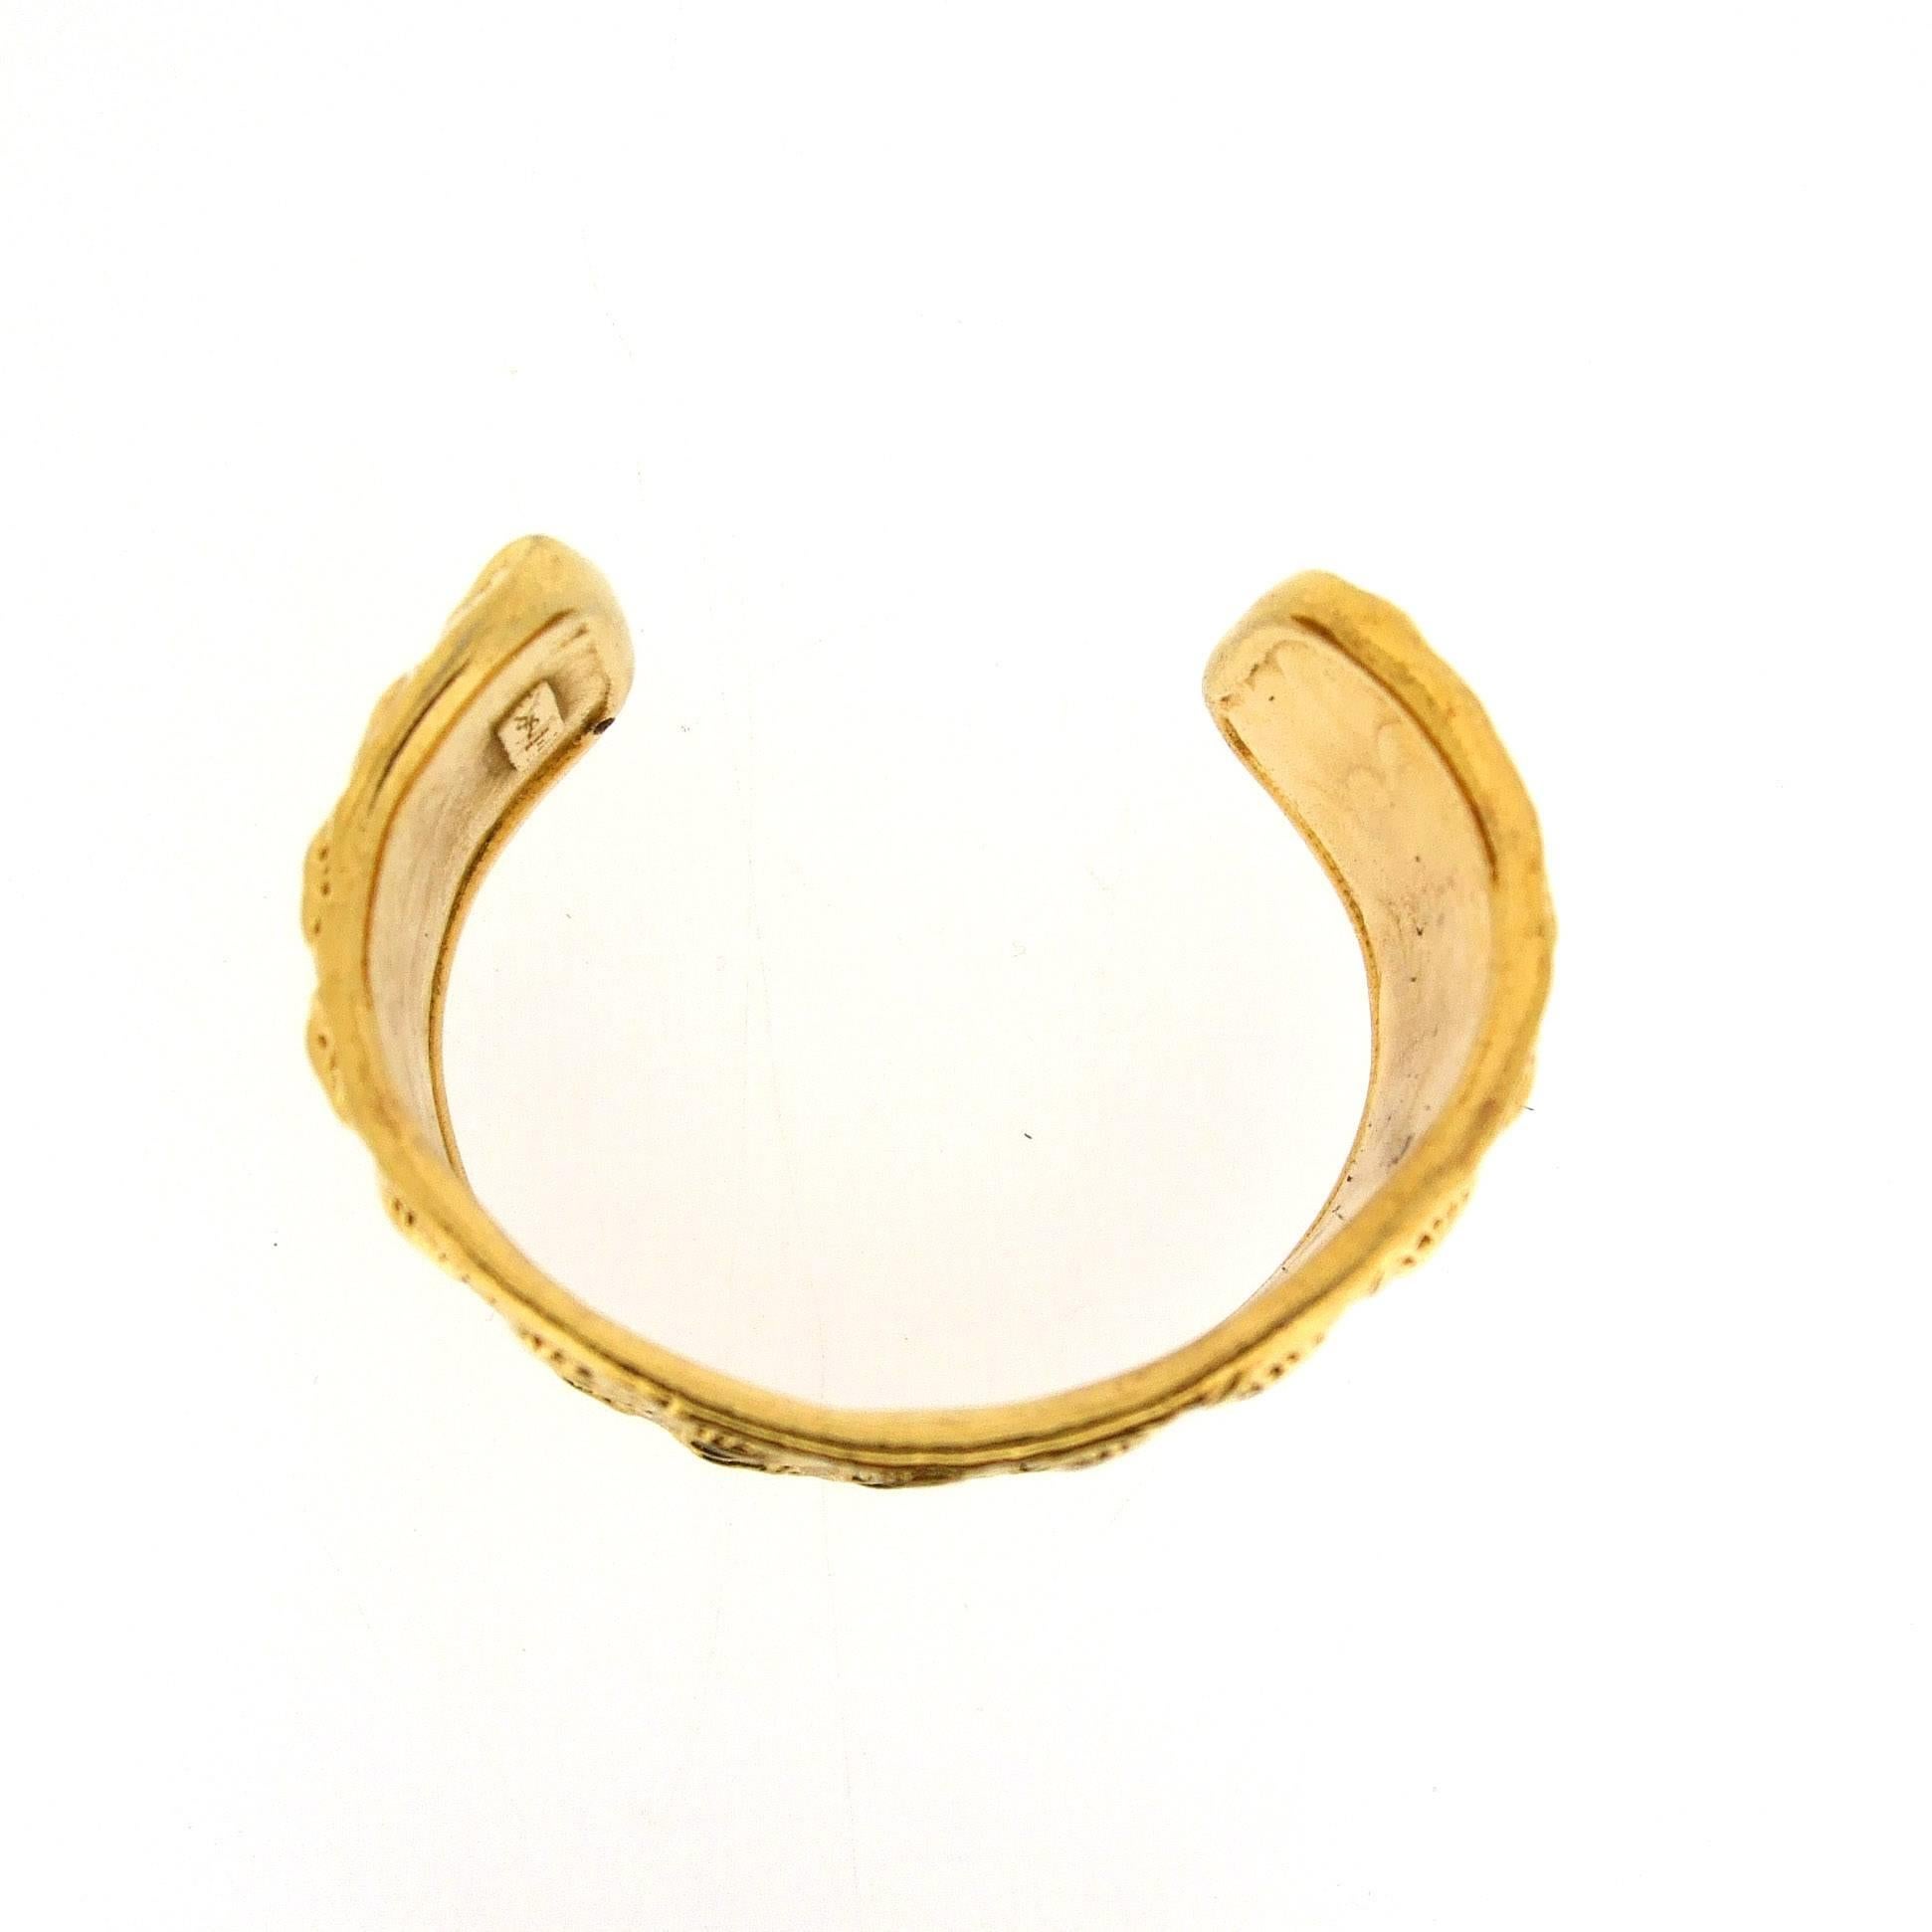 Gold Crocodile Skin Effect Yves Saint Laurent Cuff Bracelet YSL In Excellent Condition For Sale In London, GB